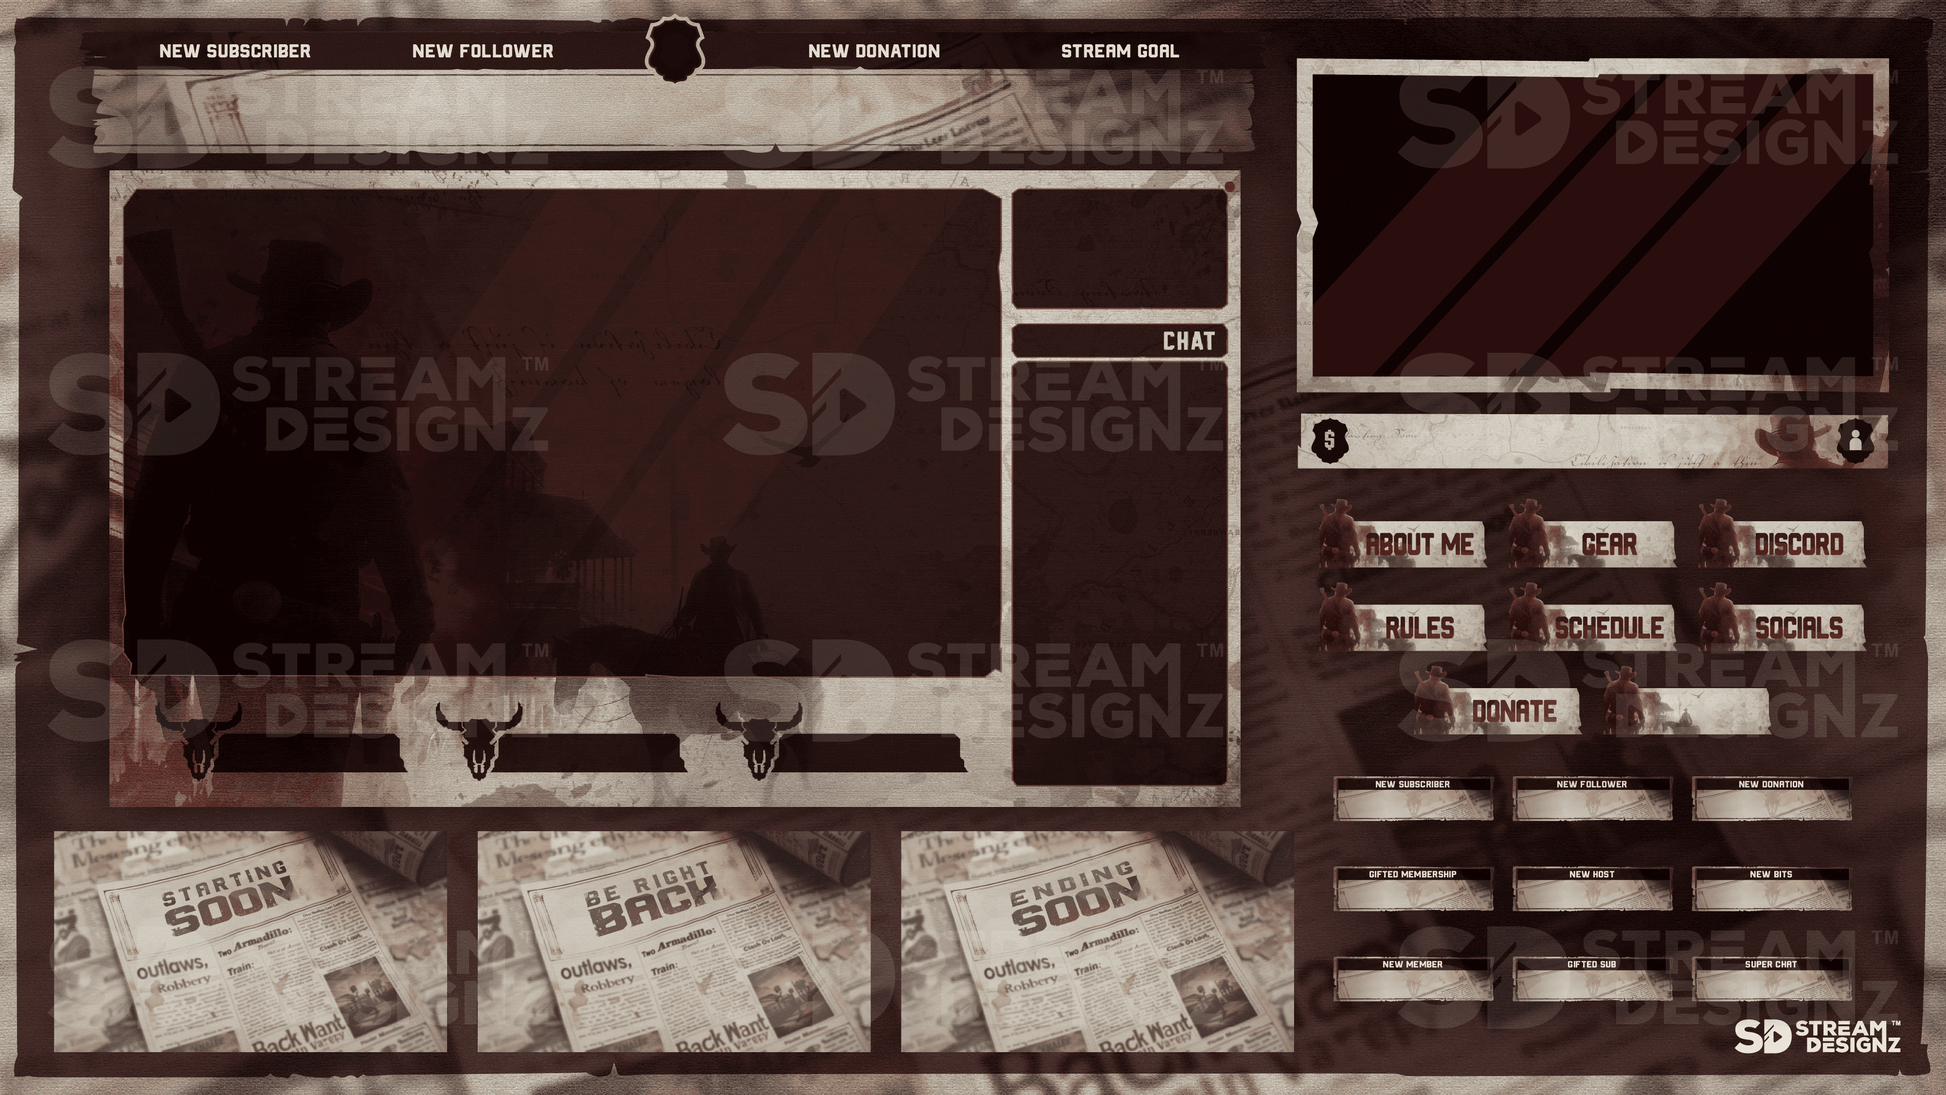 static stream overlay package feature image outlaw stream designz